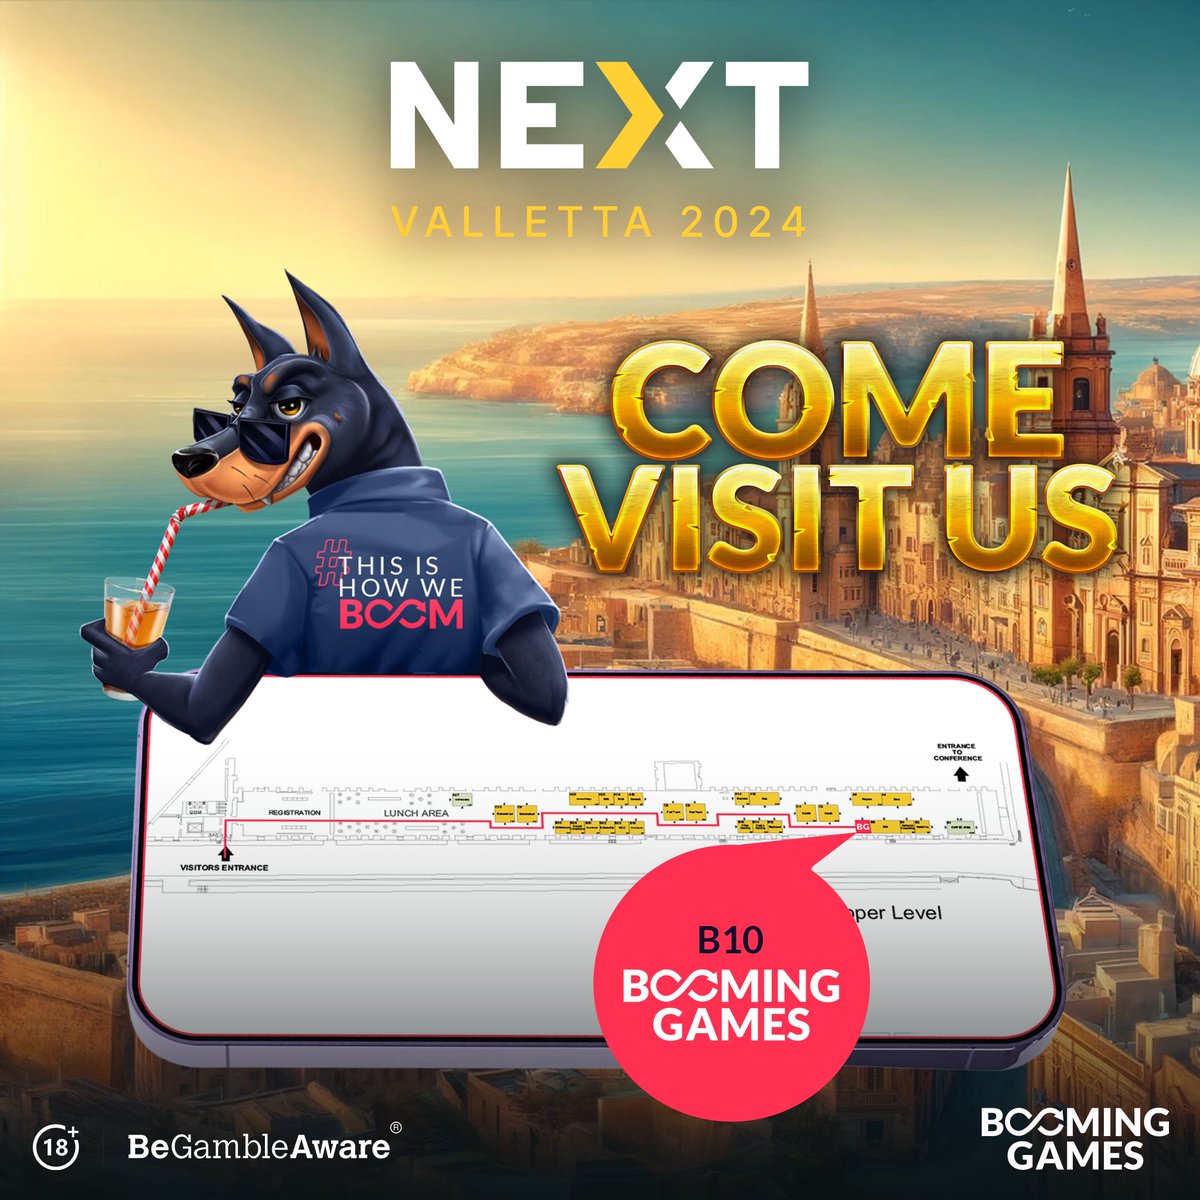 Only two weeks until Next.io Valletta! Don't miss out! Book a meeting with our incredible team now! Visit us at booth B10 to learn about our products and seize business opportunities! #casino #games #casinogames #NextioValletta #BusinessOpportunities #Conference